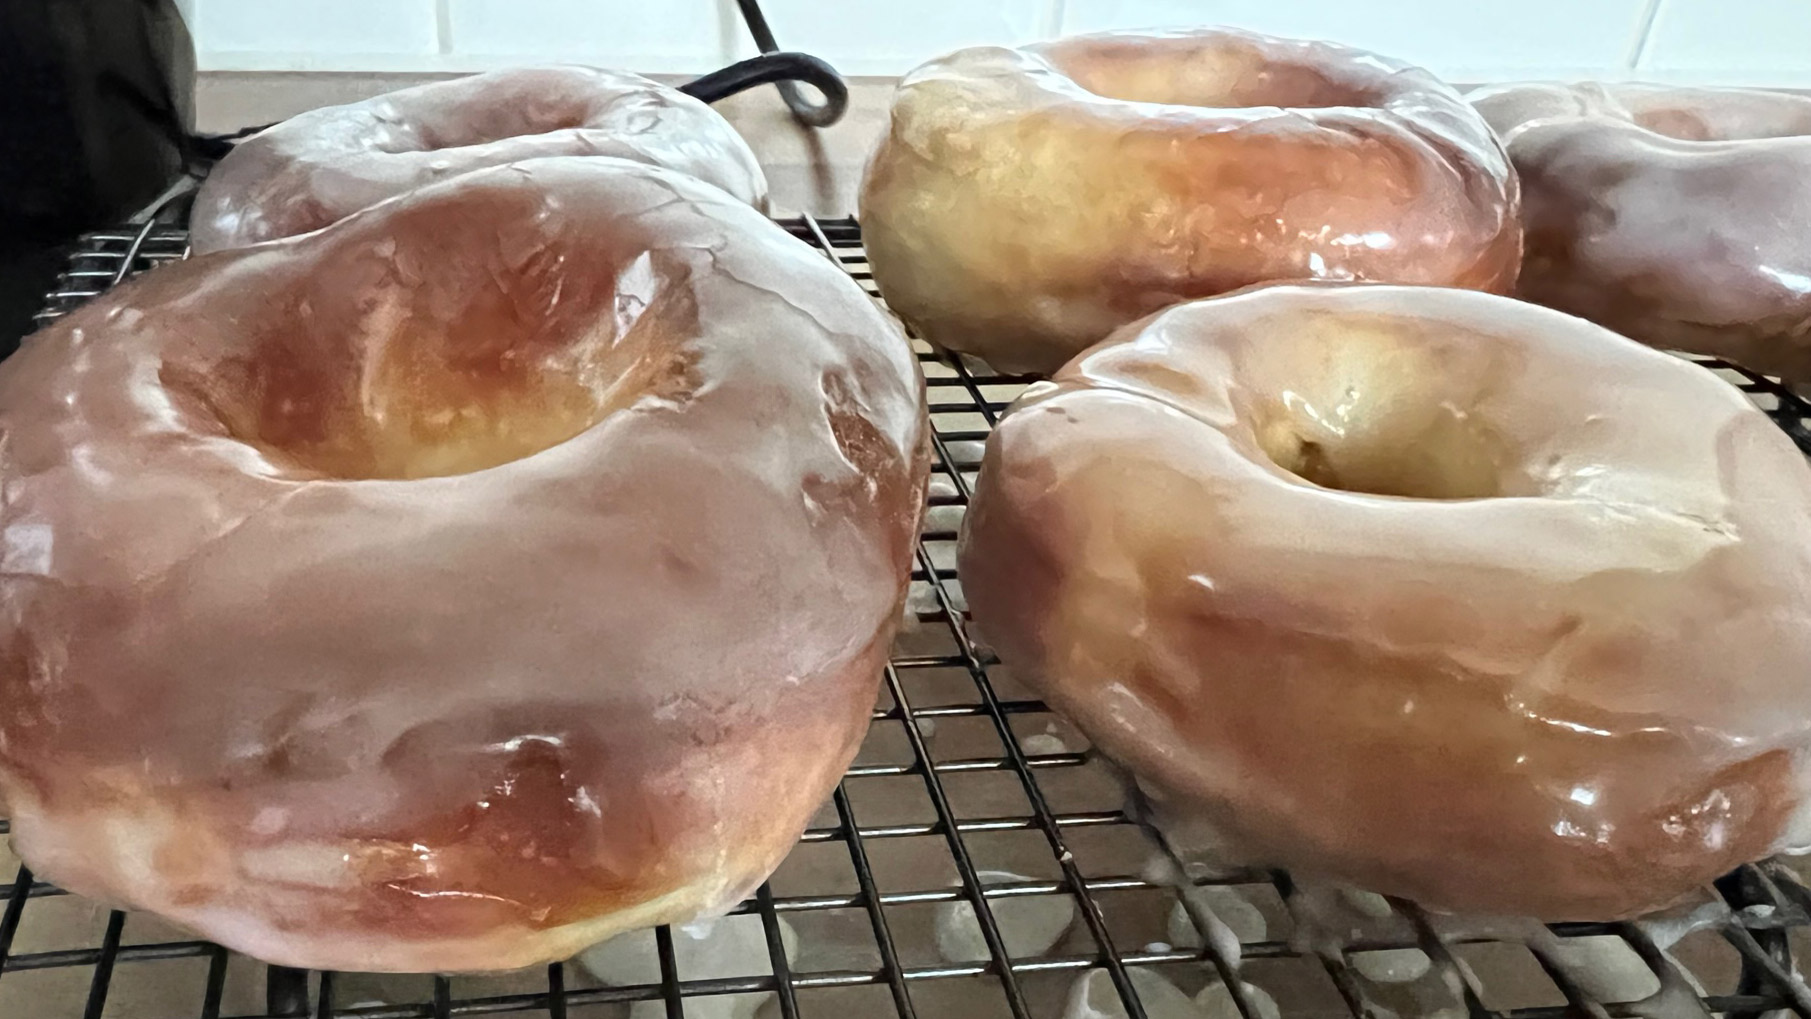 A close-up of air fryer donuts that have been glazed